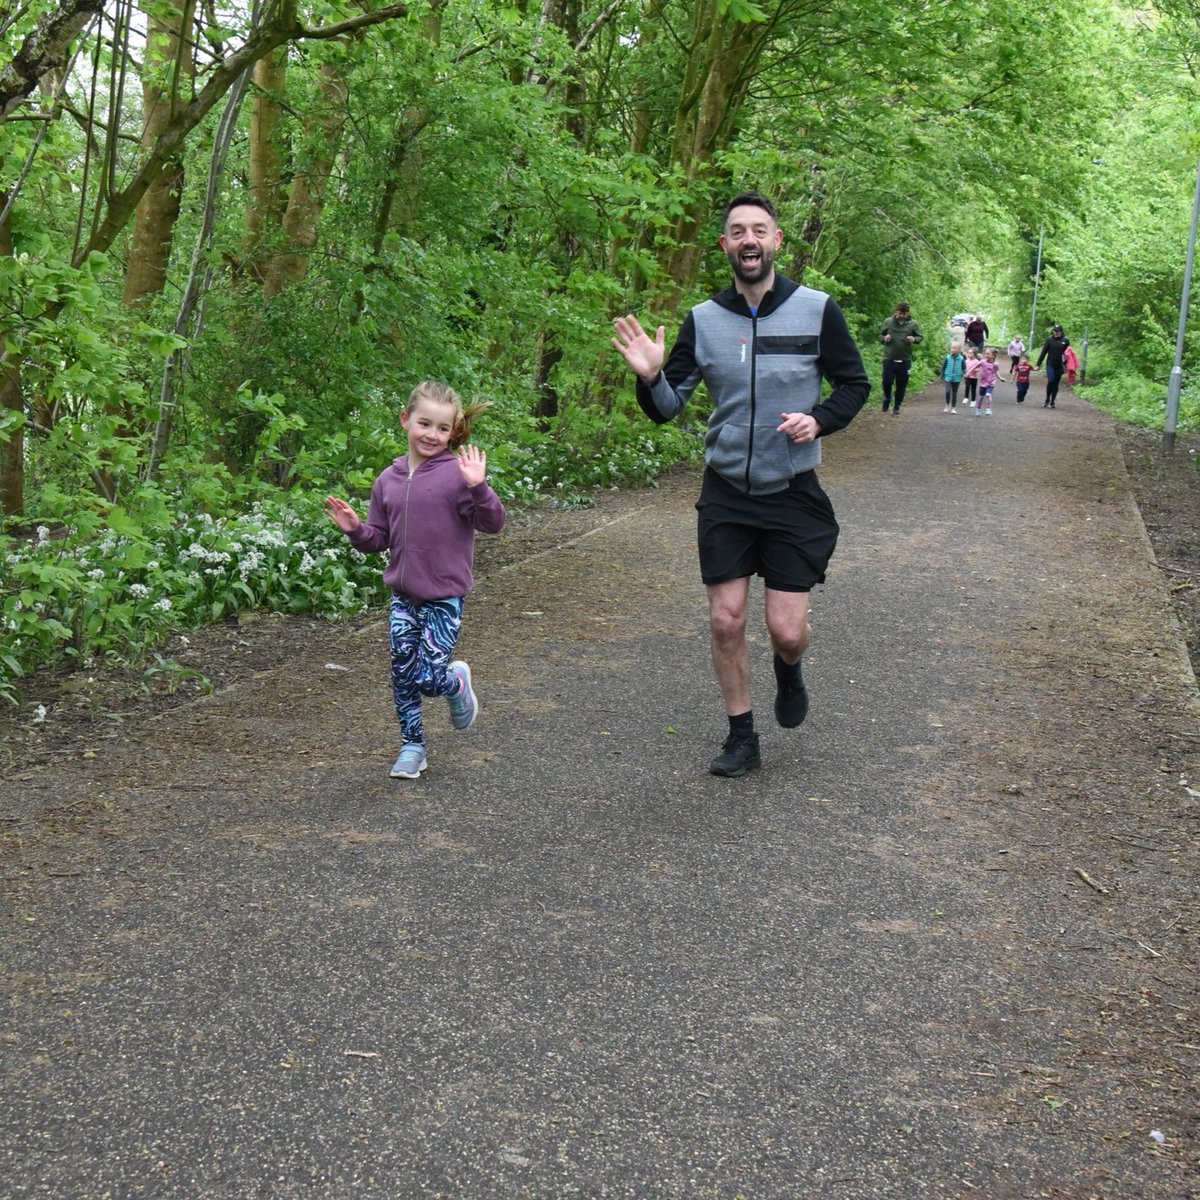 Who made it to junior parkrun this morning? ☀️ 🌳 #loveparkrun